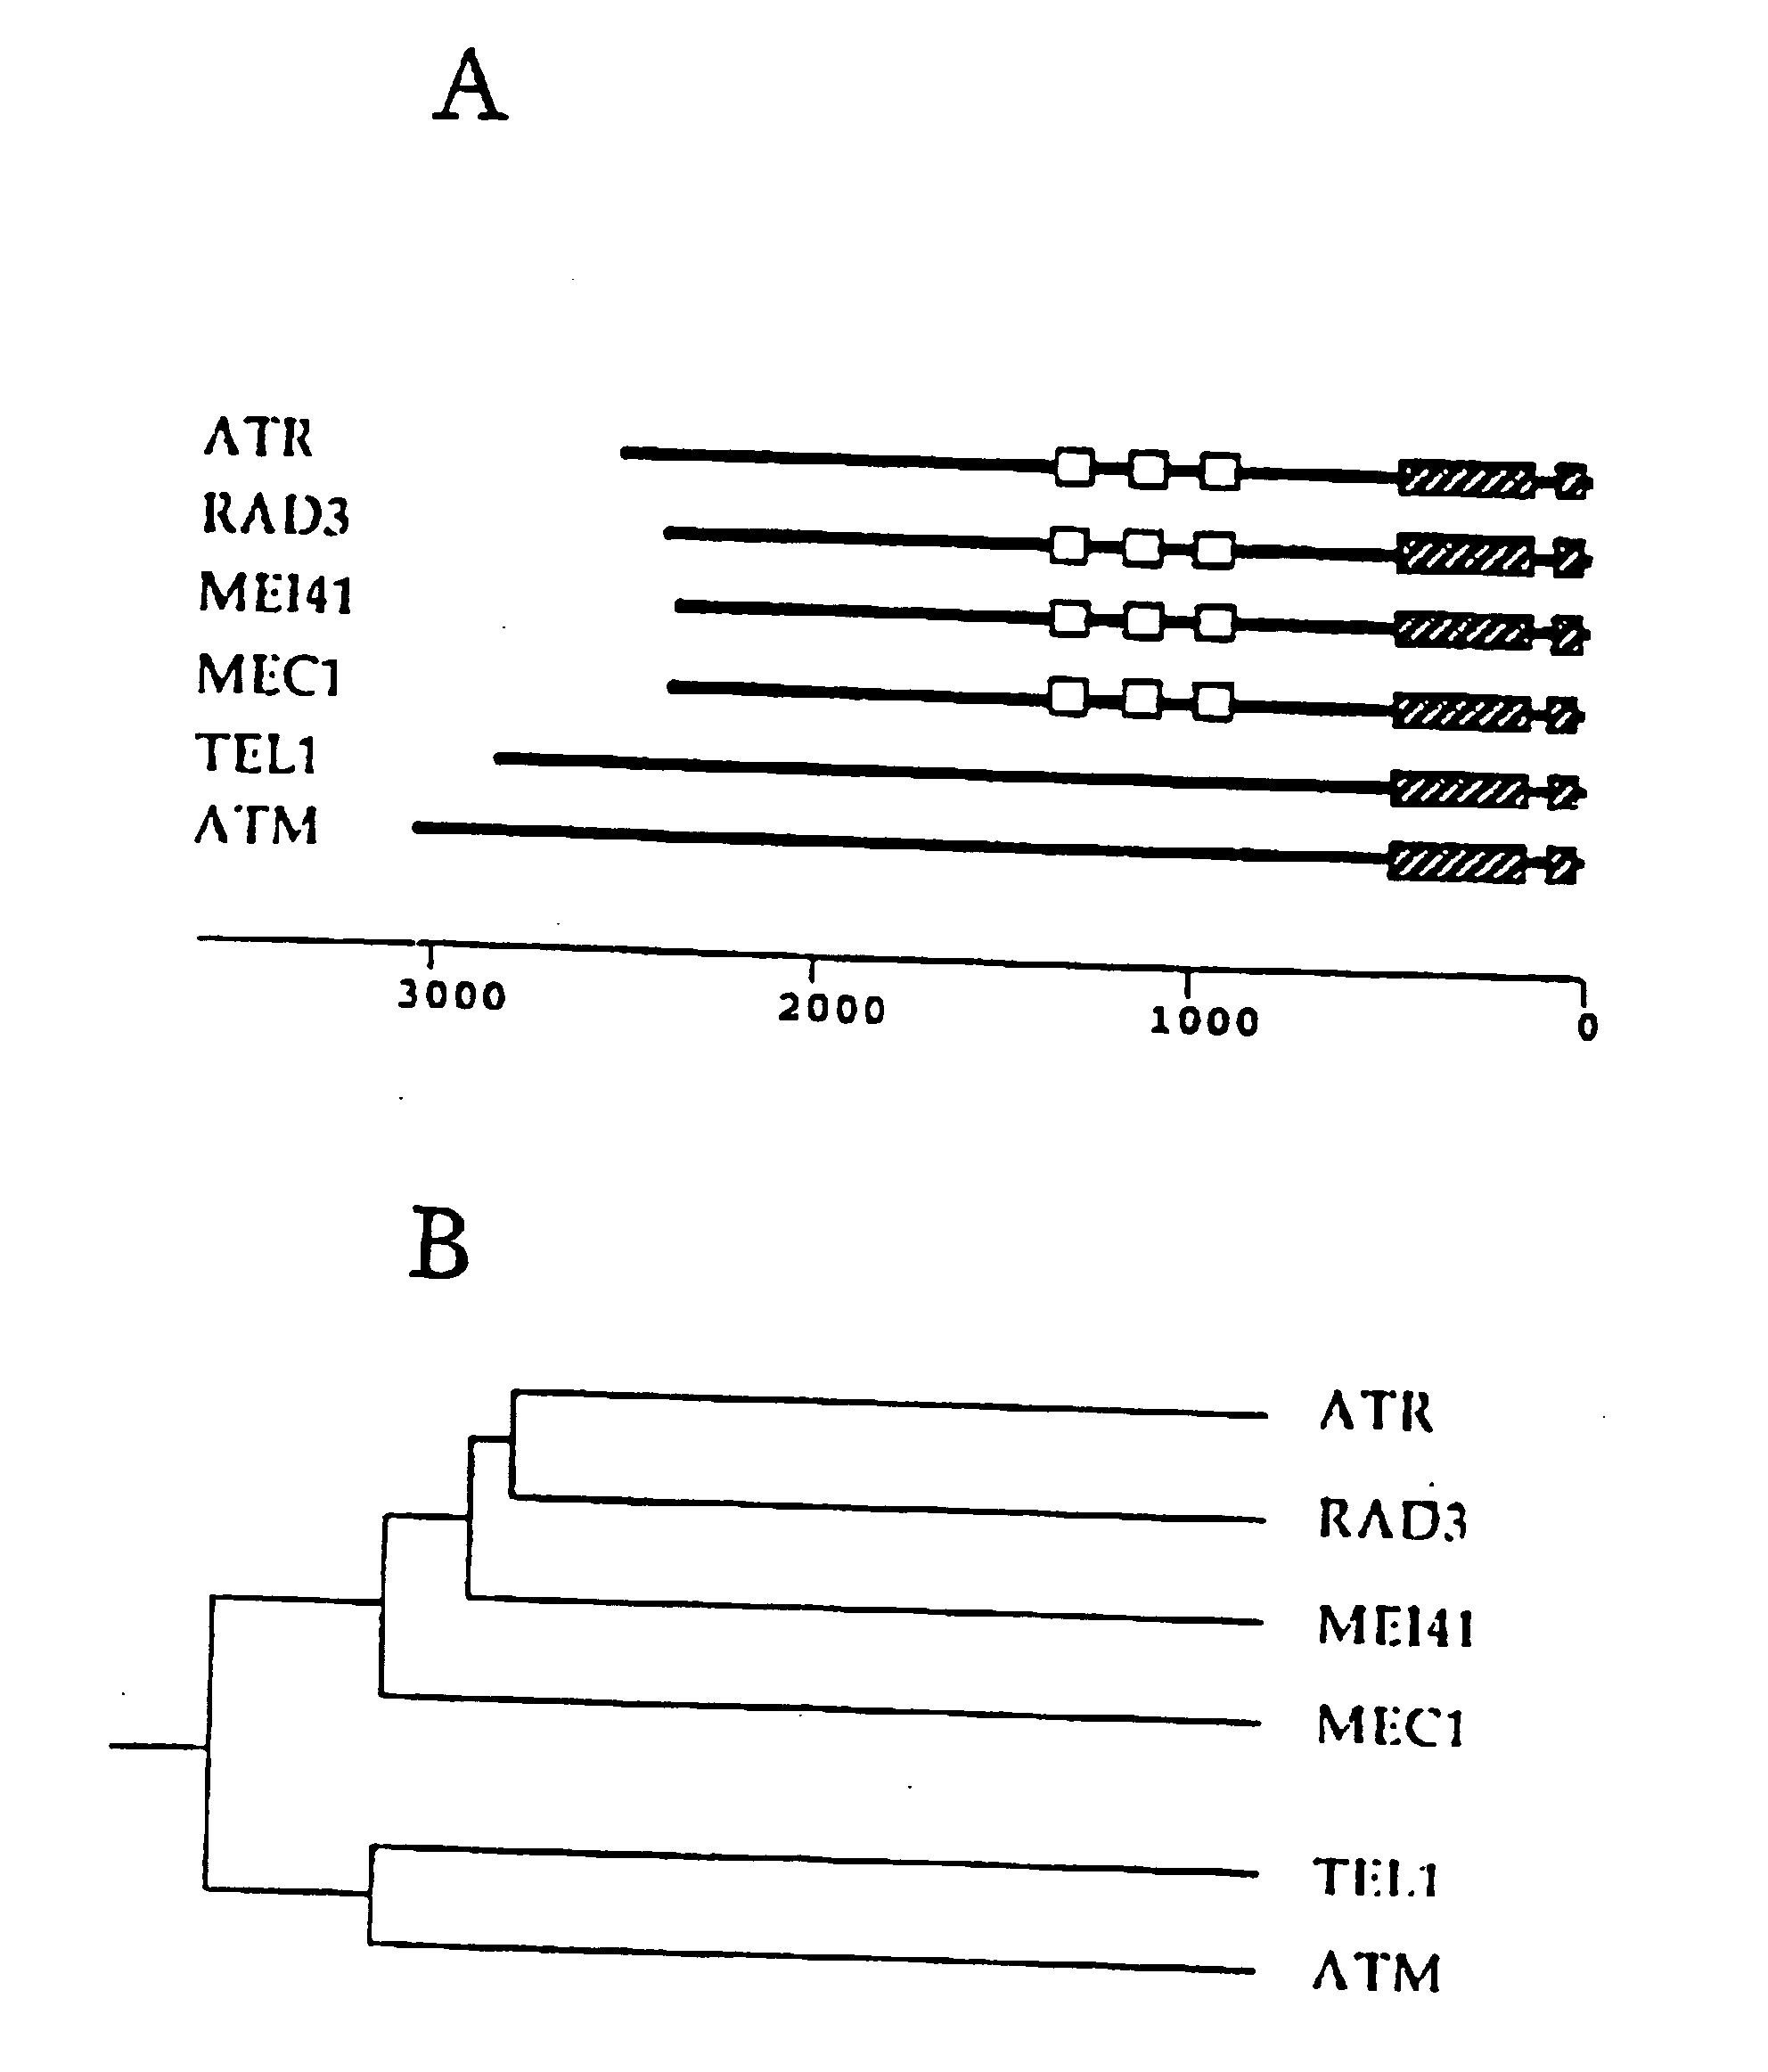 Cell-cycle checkpoint genes